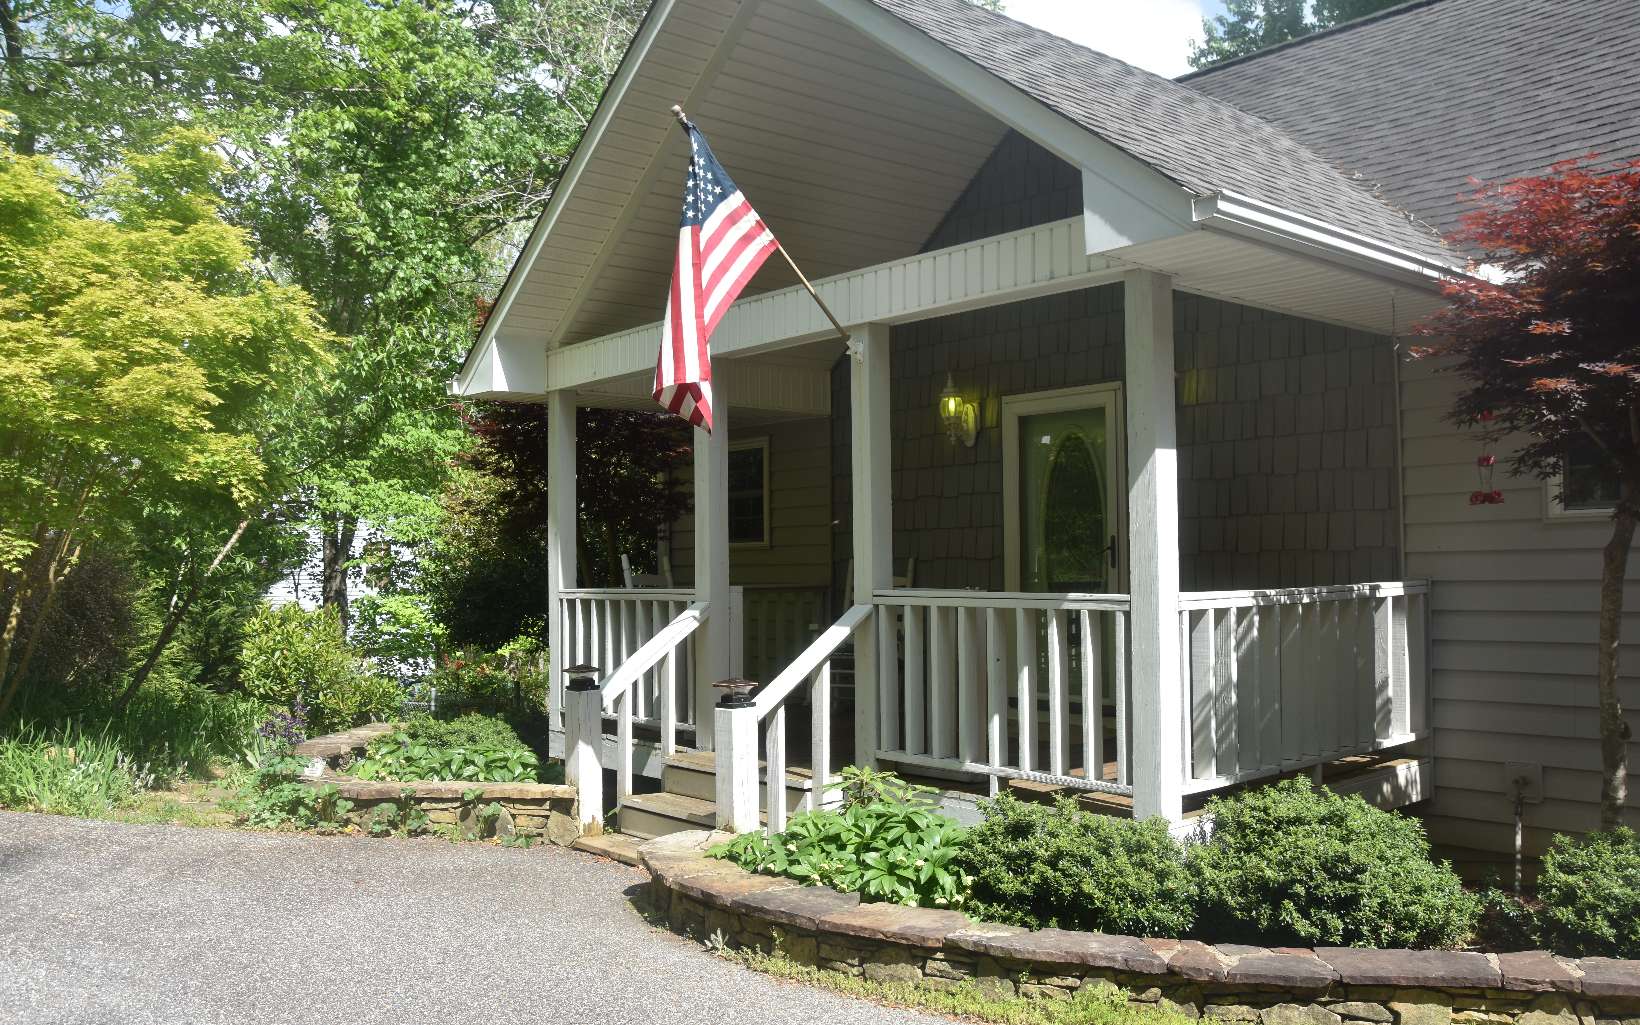 This creek side cottage is in a favorite Hiawassee neighborhood. Vaulted ceiling & hardwood floor in living area enhance the open floor plan with a stone faced gas fpl. The adjacent kitchen has marble countertops & wood cabinetry. Laundry with W/D off kitchen. The main level offers a split guest room and bath & main bedroom w/garden tub,shower and Dbl vanities & walk-in closet. Terrace level with entry has 2nd kitchen,Bdrm,Ba,W&D-hook-ups,living & den/game room, 2nd stoned faced gas fireplace. A Bullfrog spa allows for relaxing soaks while enjoying the rushing creek from terrace. The screened porch off main brings the outdoors into living with seasonal views of Bell Mtn. & year round creek viewing. Beyond the fenced yard is a quiet spot w/fire pit at creek side. Gorgeous blooming year round landscape for any avid gardener. Close to all outdoors activities & daily services of this fabulous location.